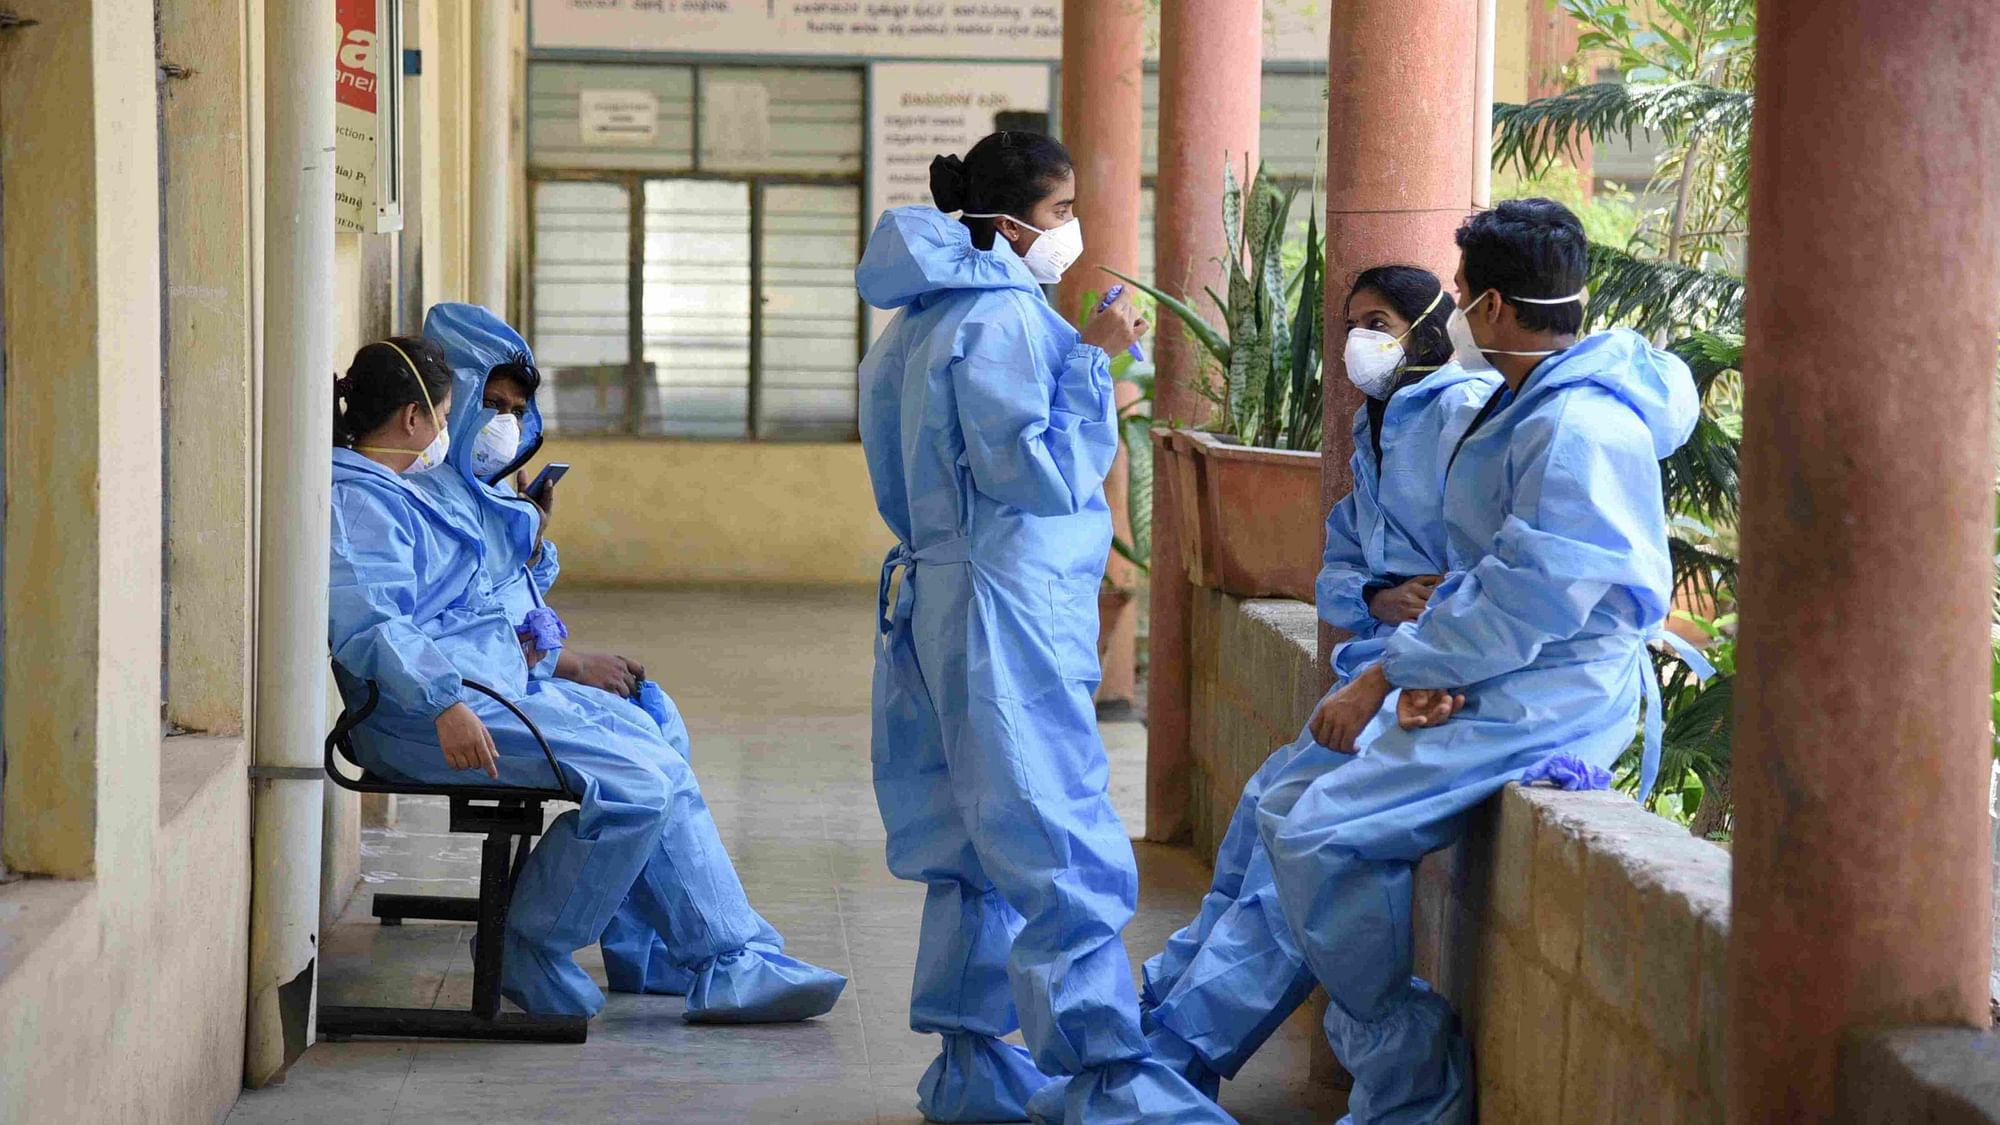 Coronavirus News Live Updates: Medics wearing protective suits are seen at a hospital in Bengaluru.